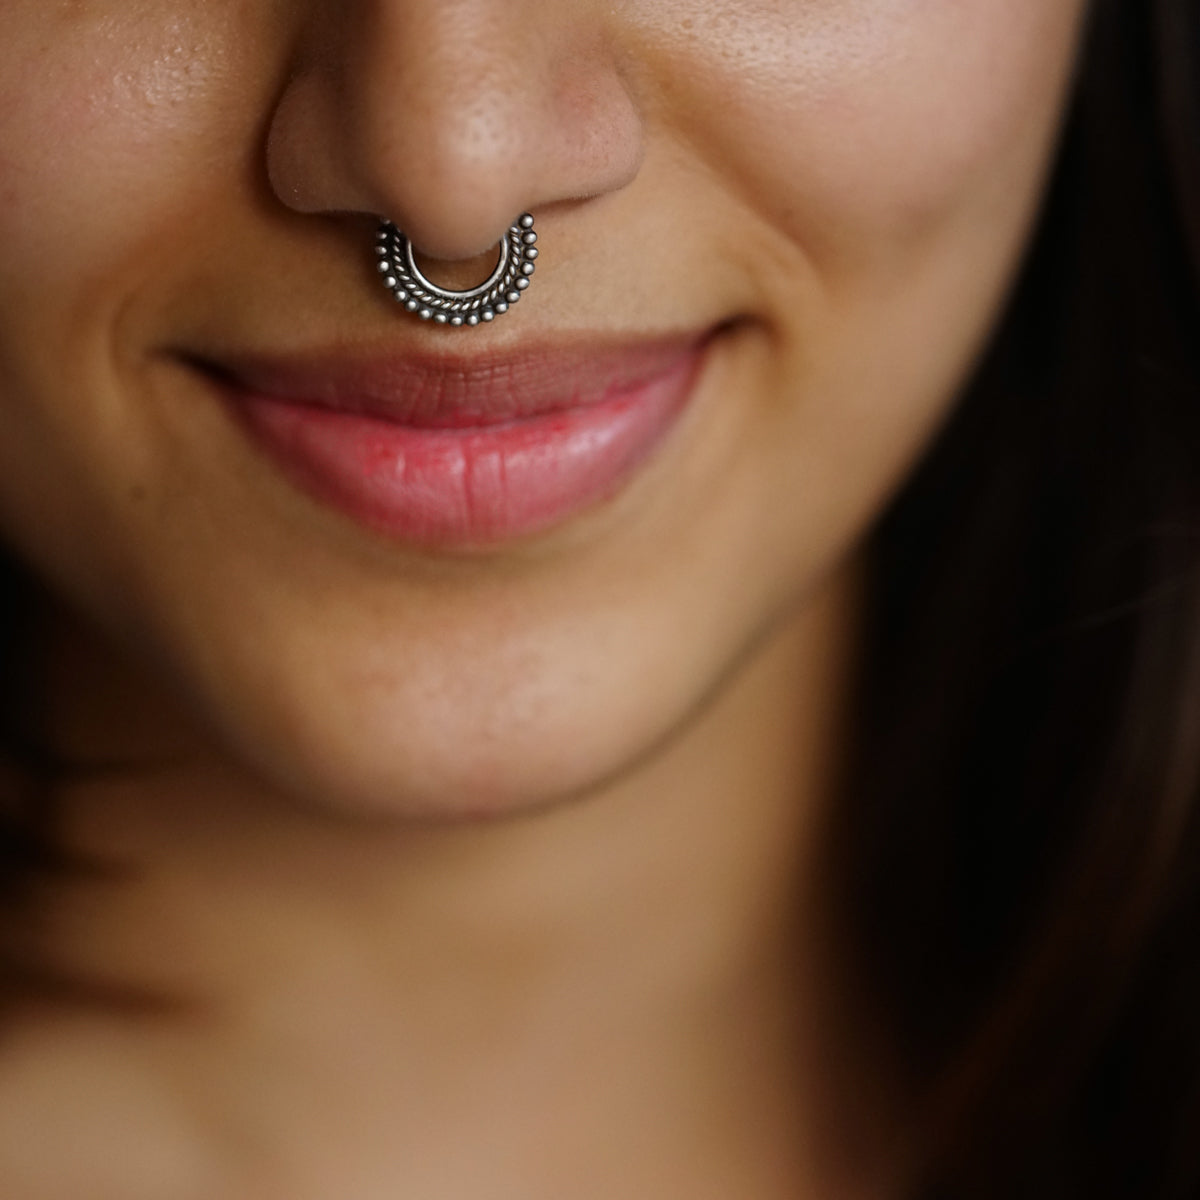 Pin by Fernando on Bollywood | Nose ring jewelry, Nose jewelry, Indian  bride makeup